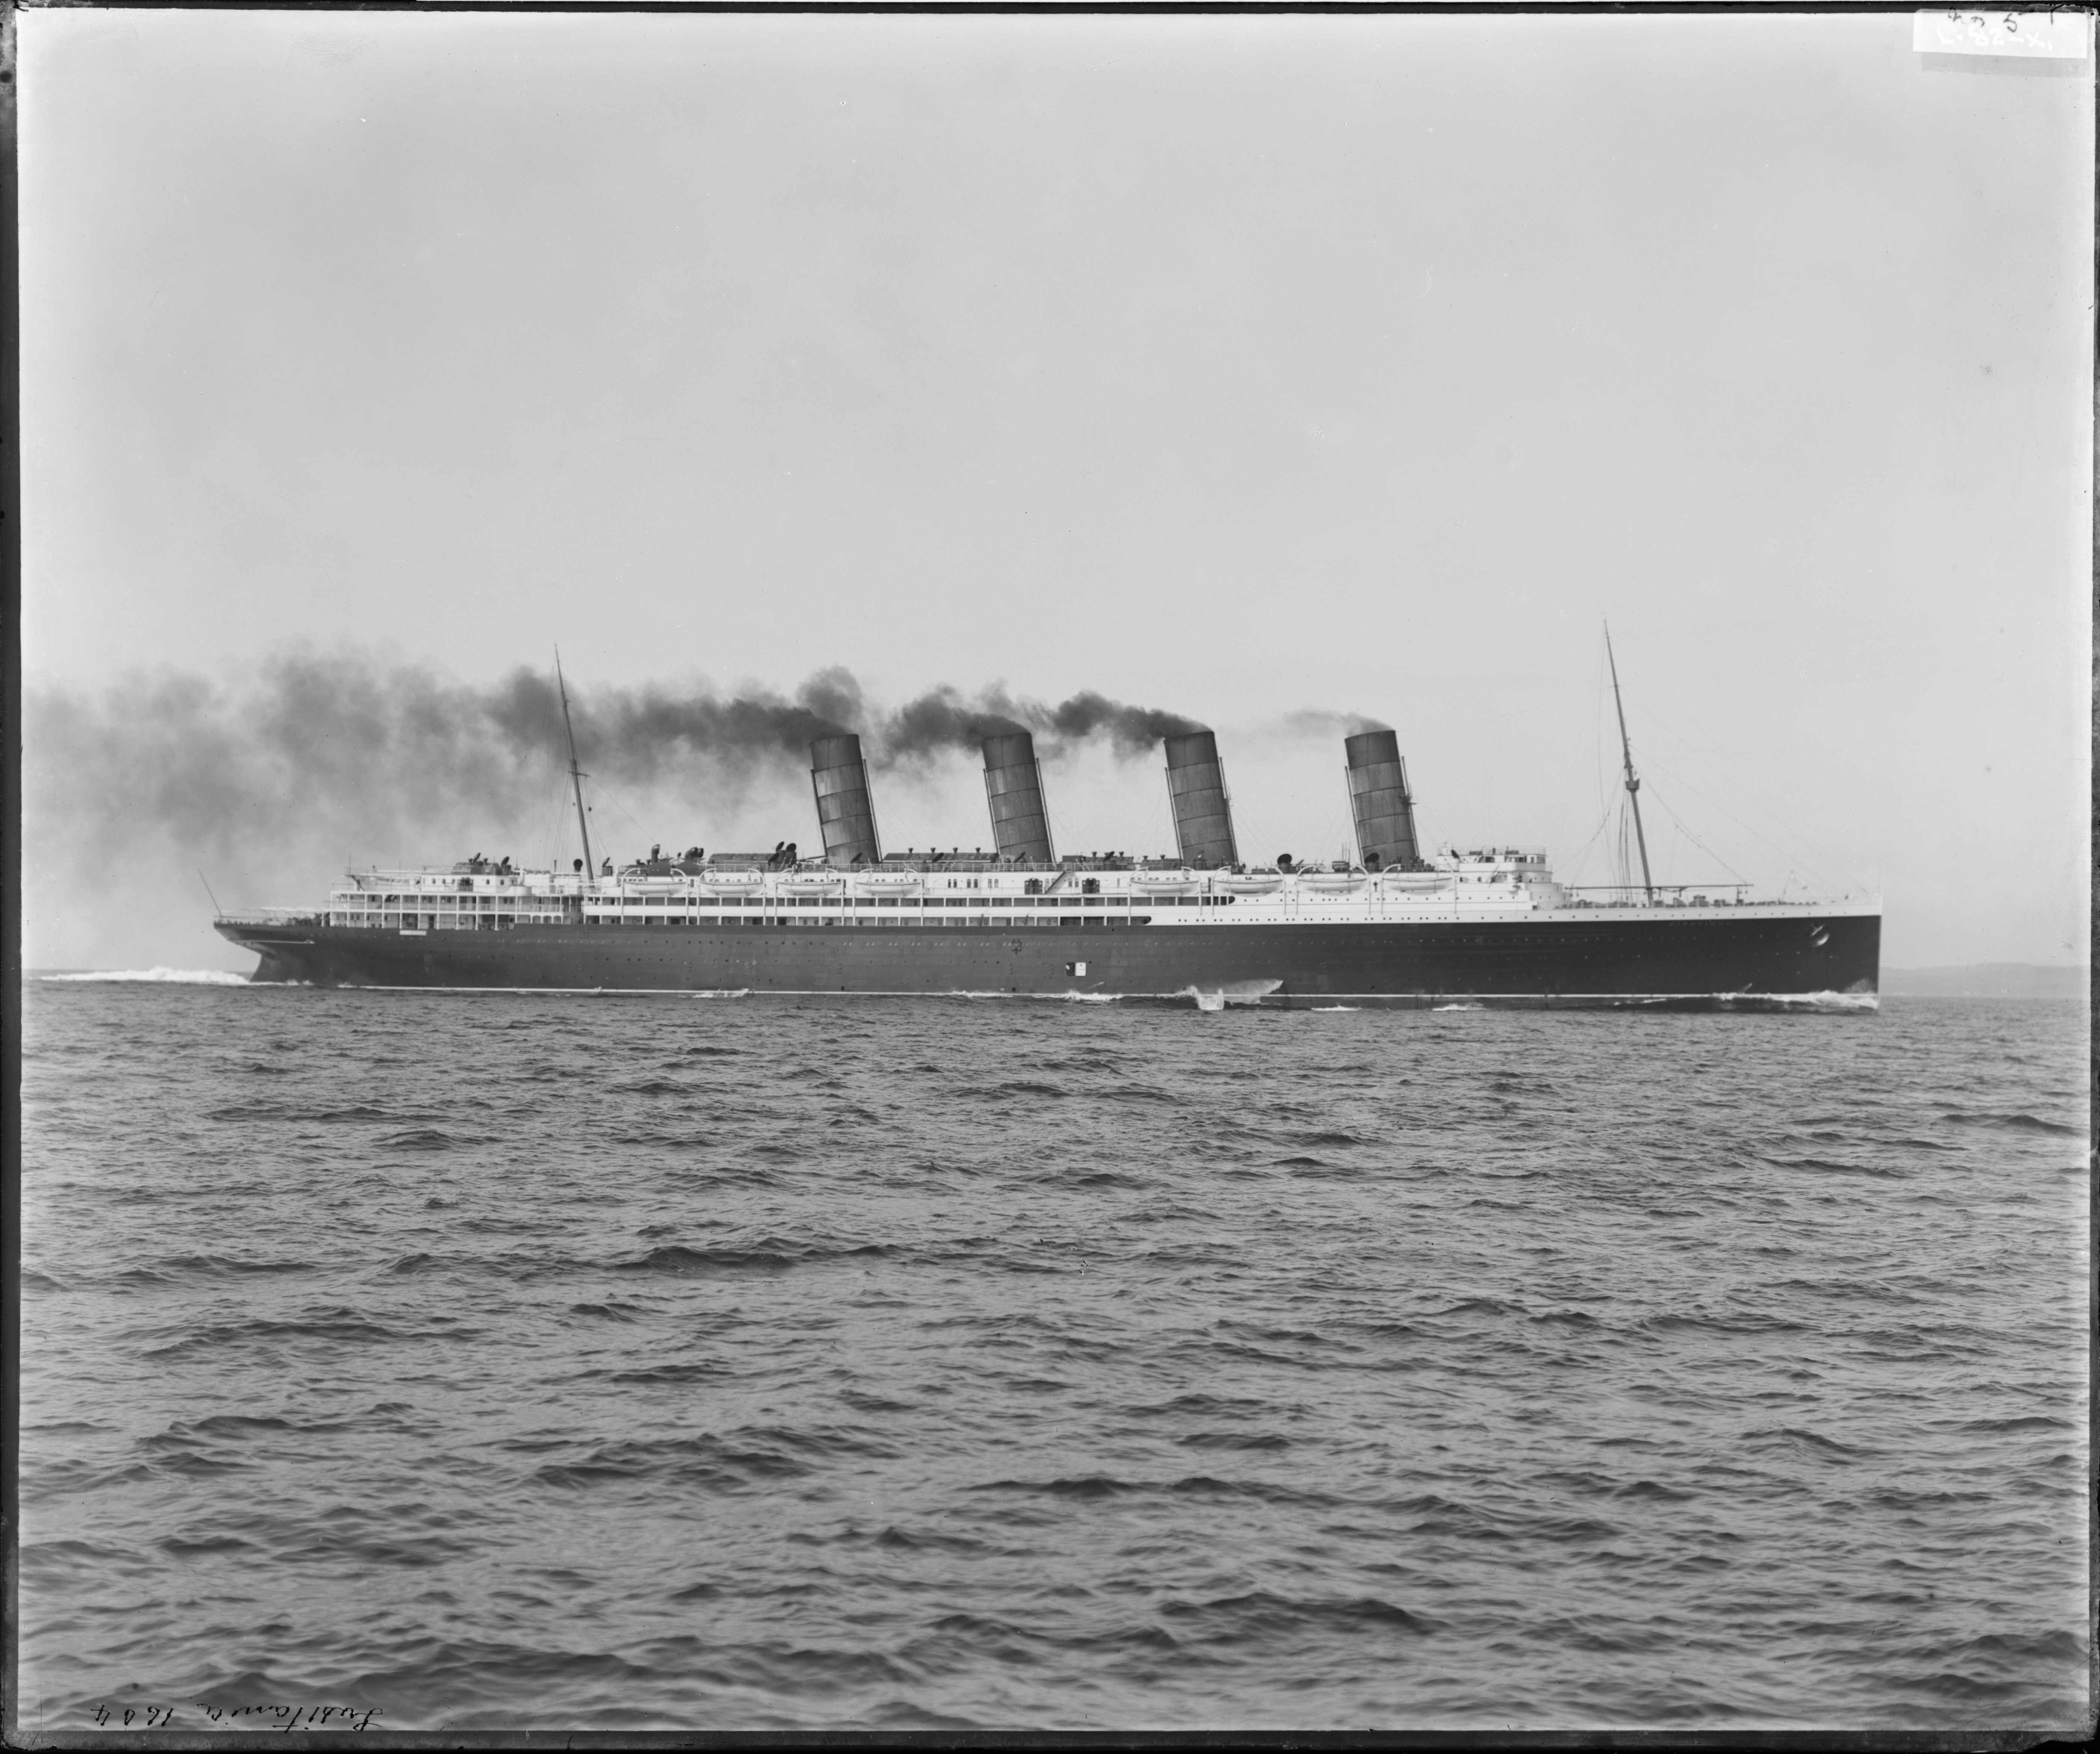 Commemorating The Sinking Of The Lusitania 100 Years Ago